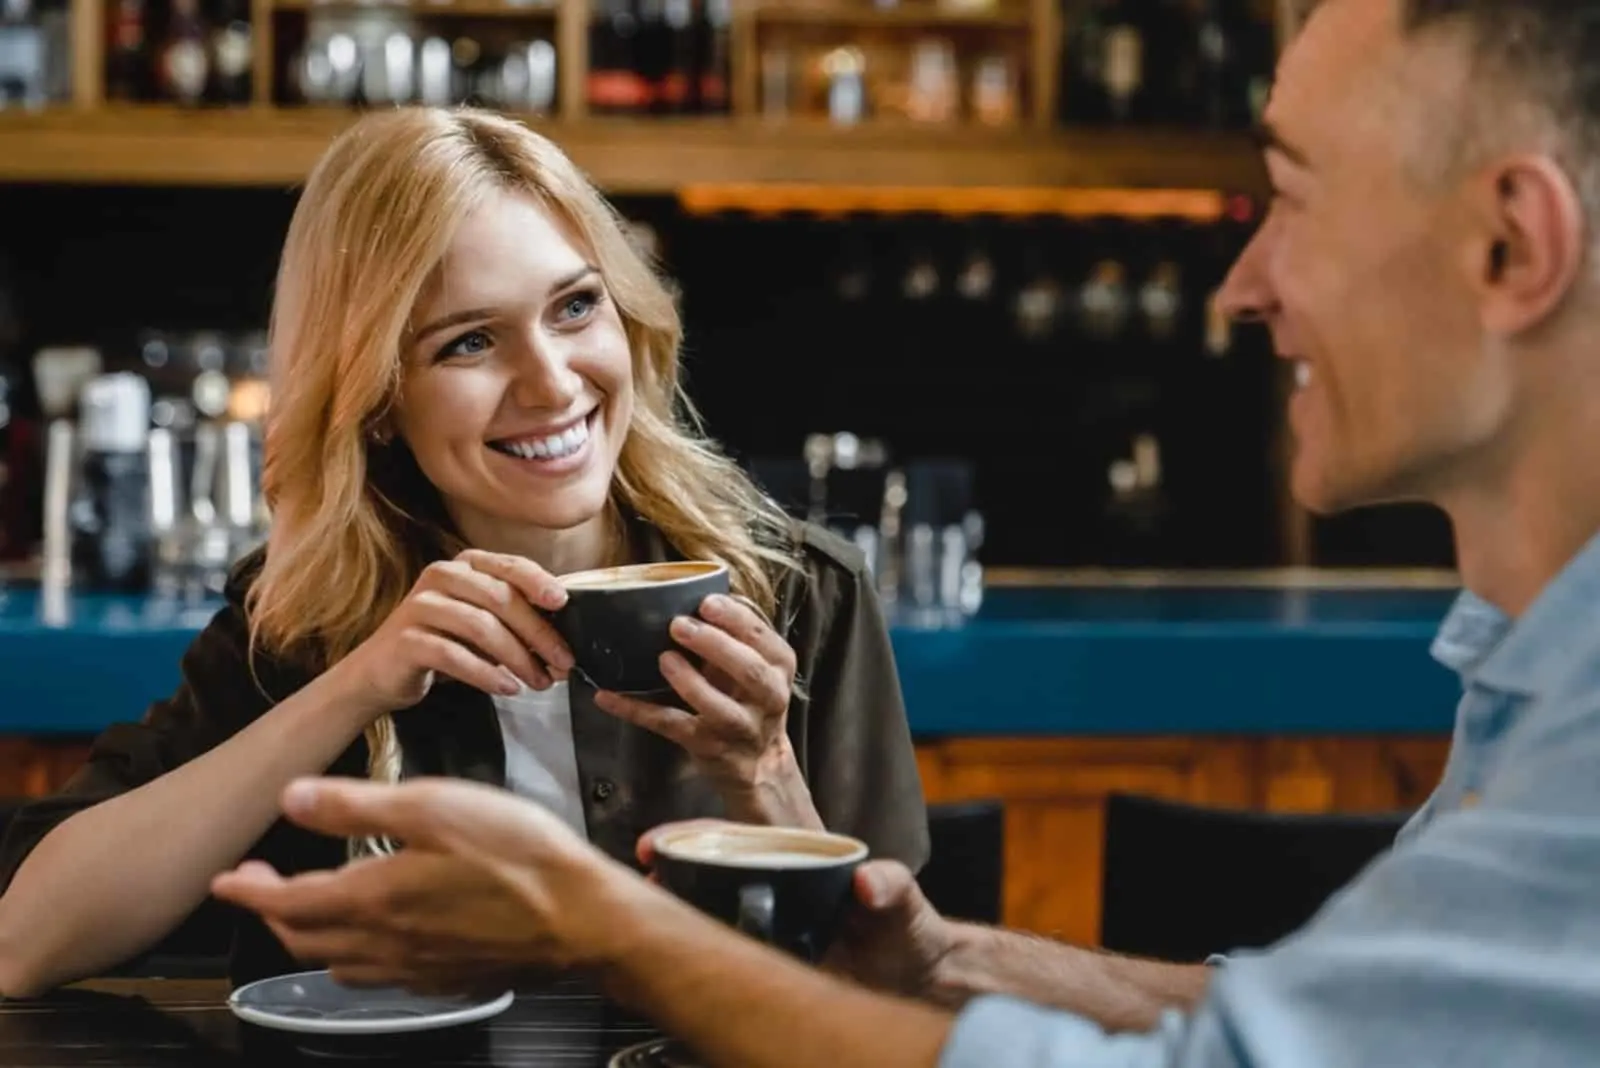 smiling woman talking with a man over coffee